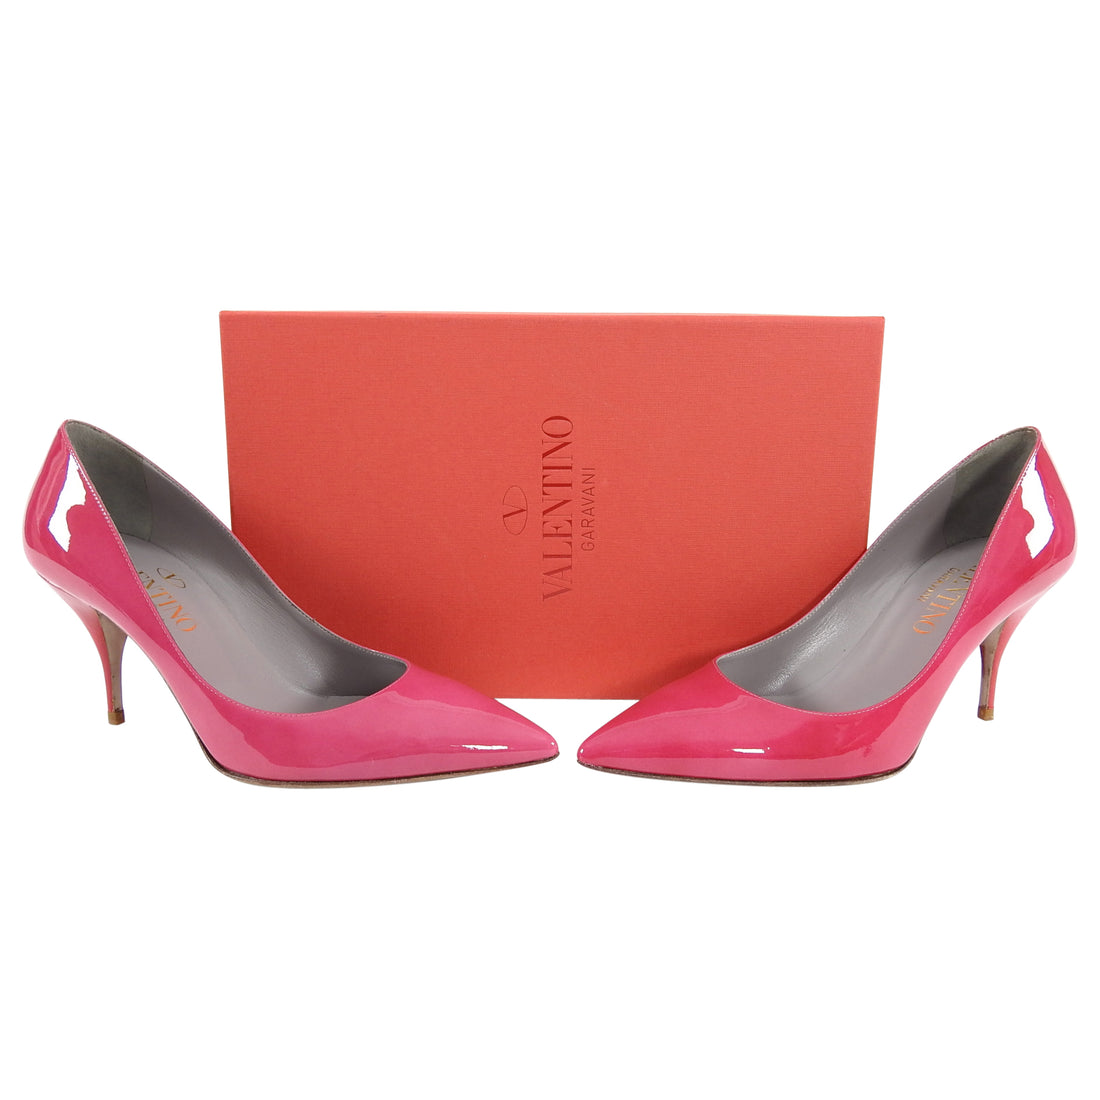 Valentino Hot Pink Ombre Patent Leather Pumps Heels - 38.5 / 8